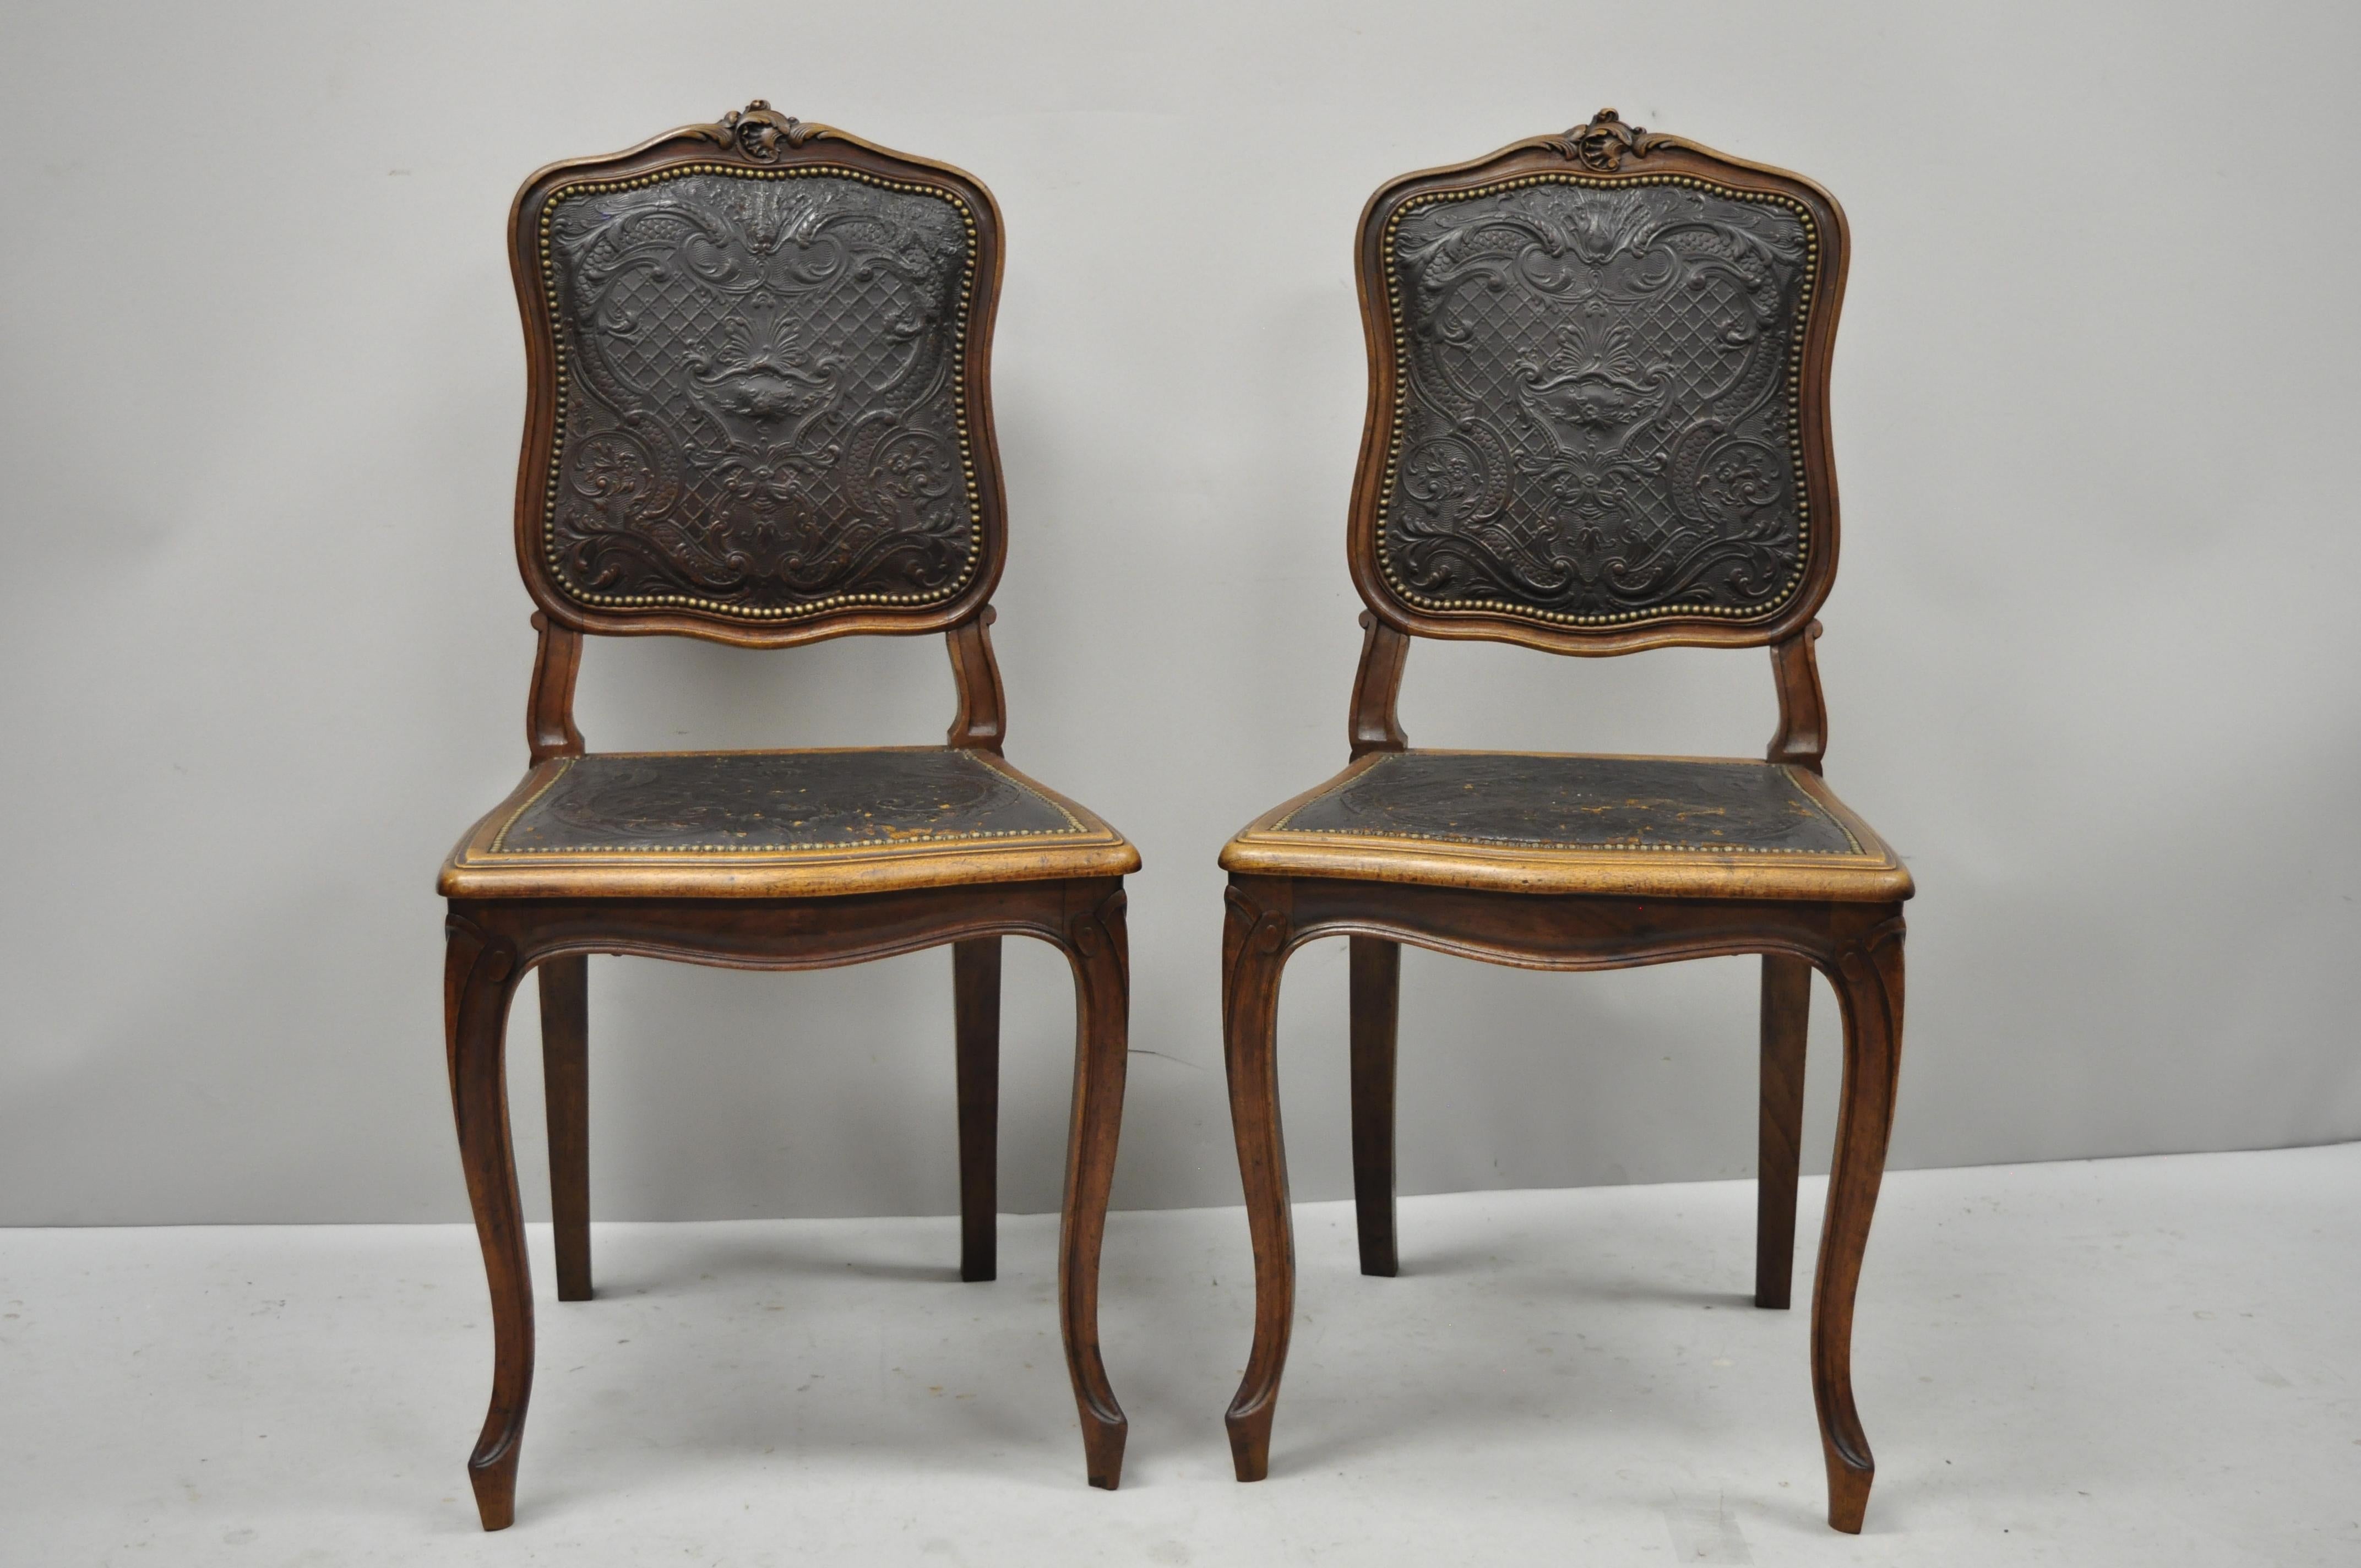 Pair of antique French Louis XV fancy brown embossed leather walnut side chair. Items feature brown embossed leather back and seat, nailhead trim, solid wood frame, finely carved details, cabriole legs, very nice antique item, great style and form,